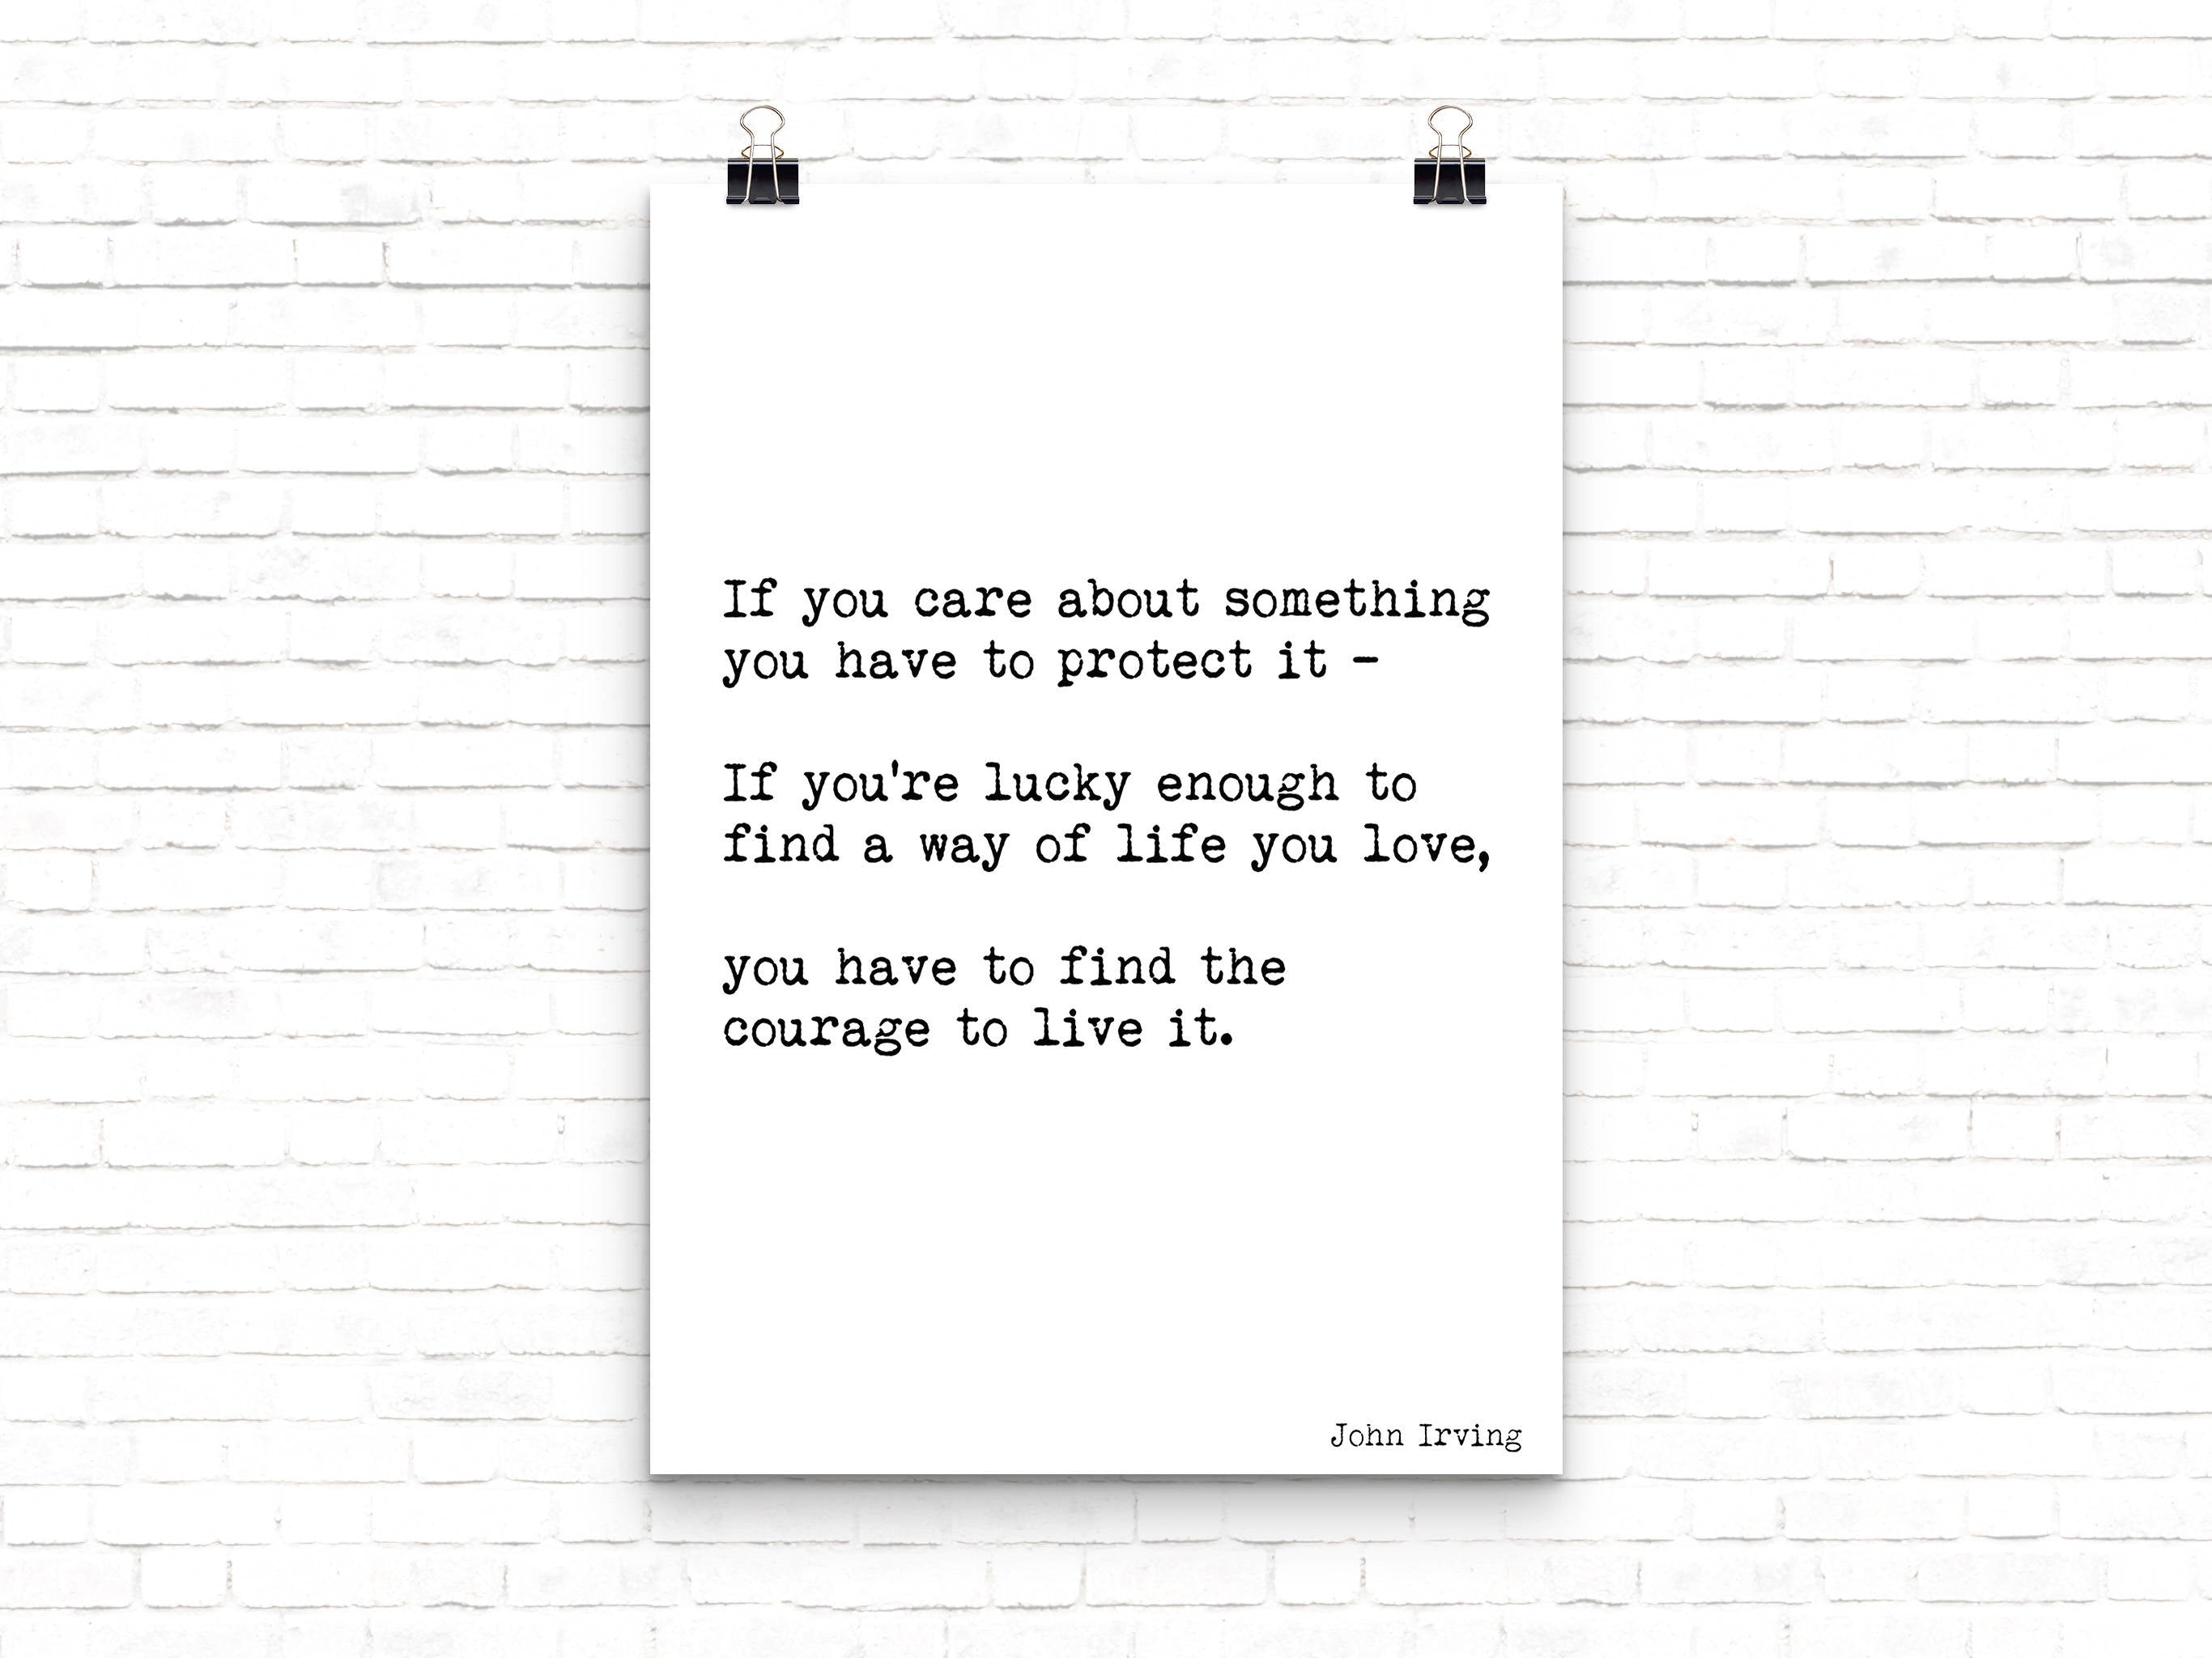 Way Of Life You Love Life Quote Motivational Print, Inspirational Quote Print Featuring A John Irving Quote In Black & White unframed